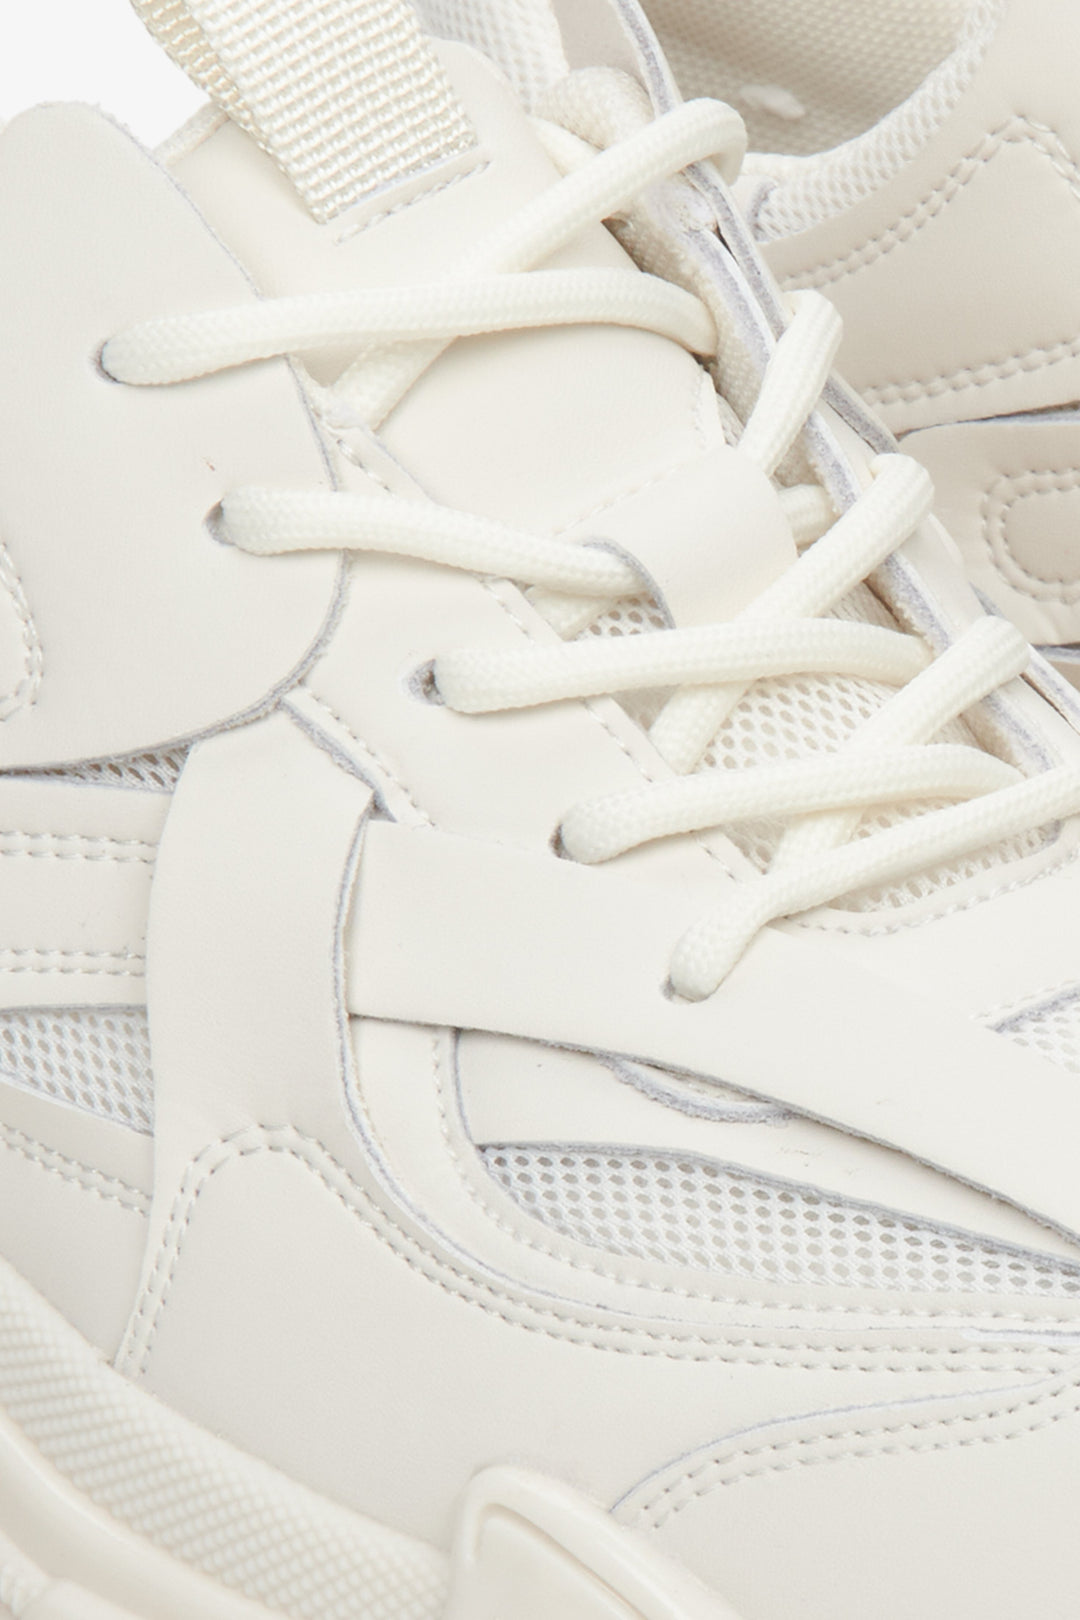 Women's white sneakers made of genuine leather and textile material for spring and autumn - close-up of the lacing system.